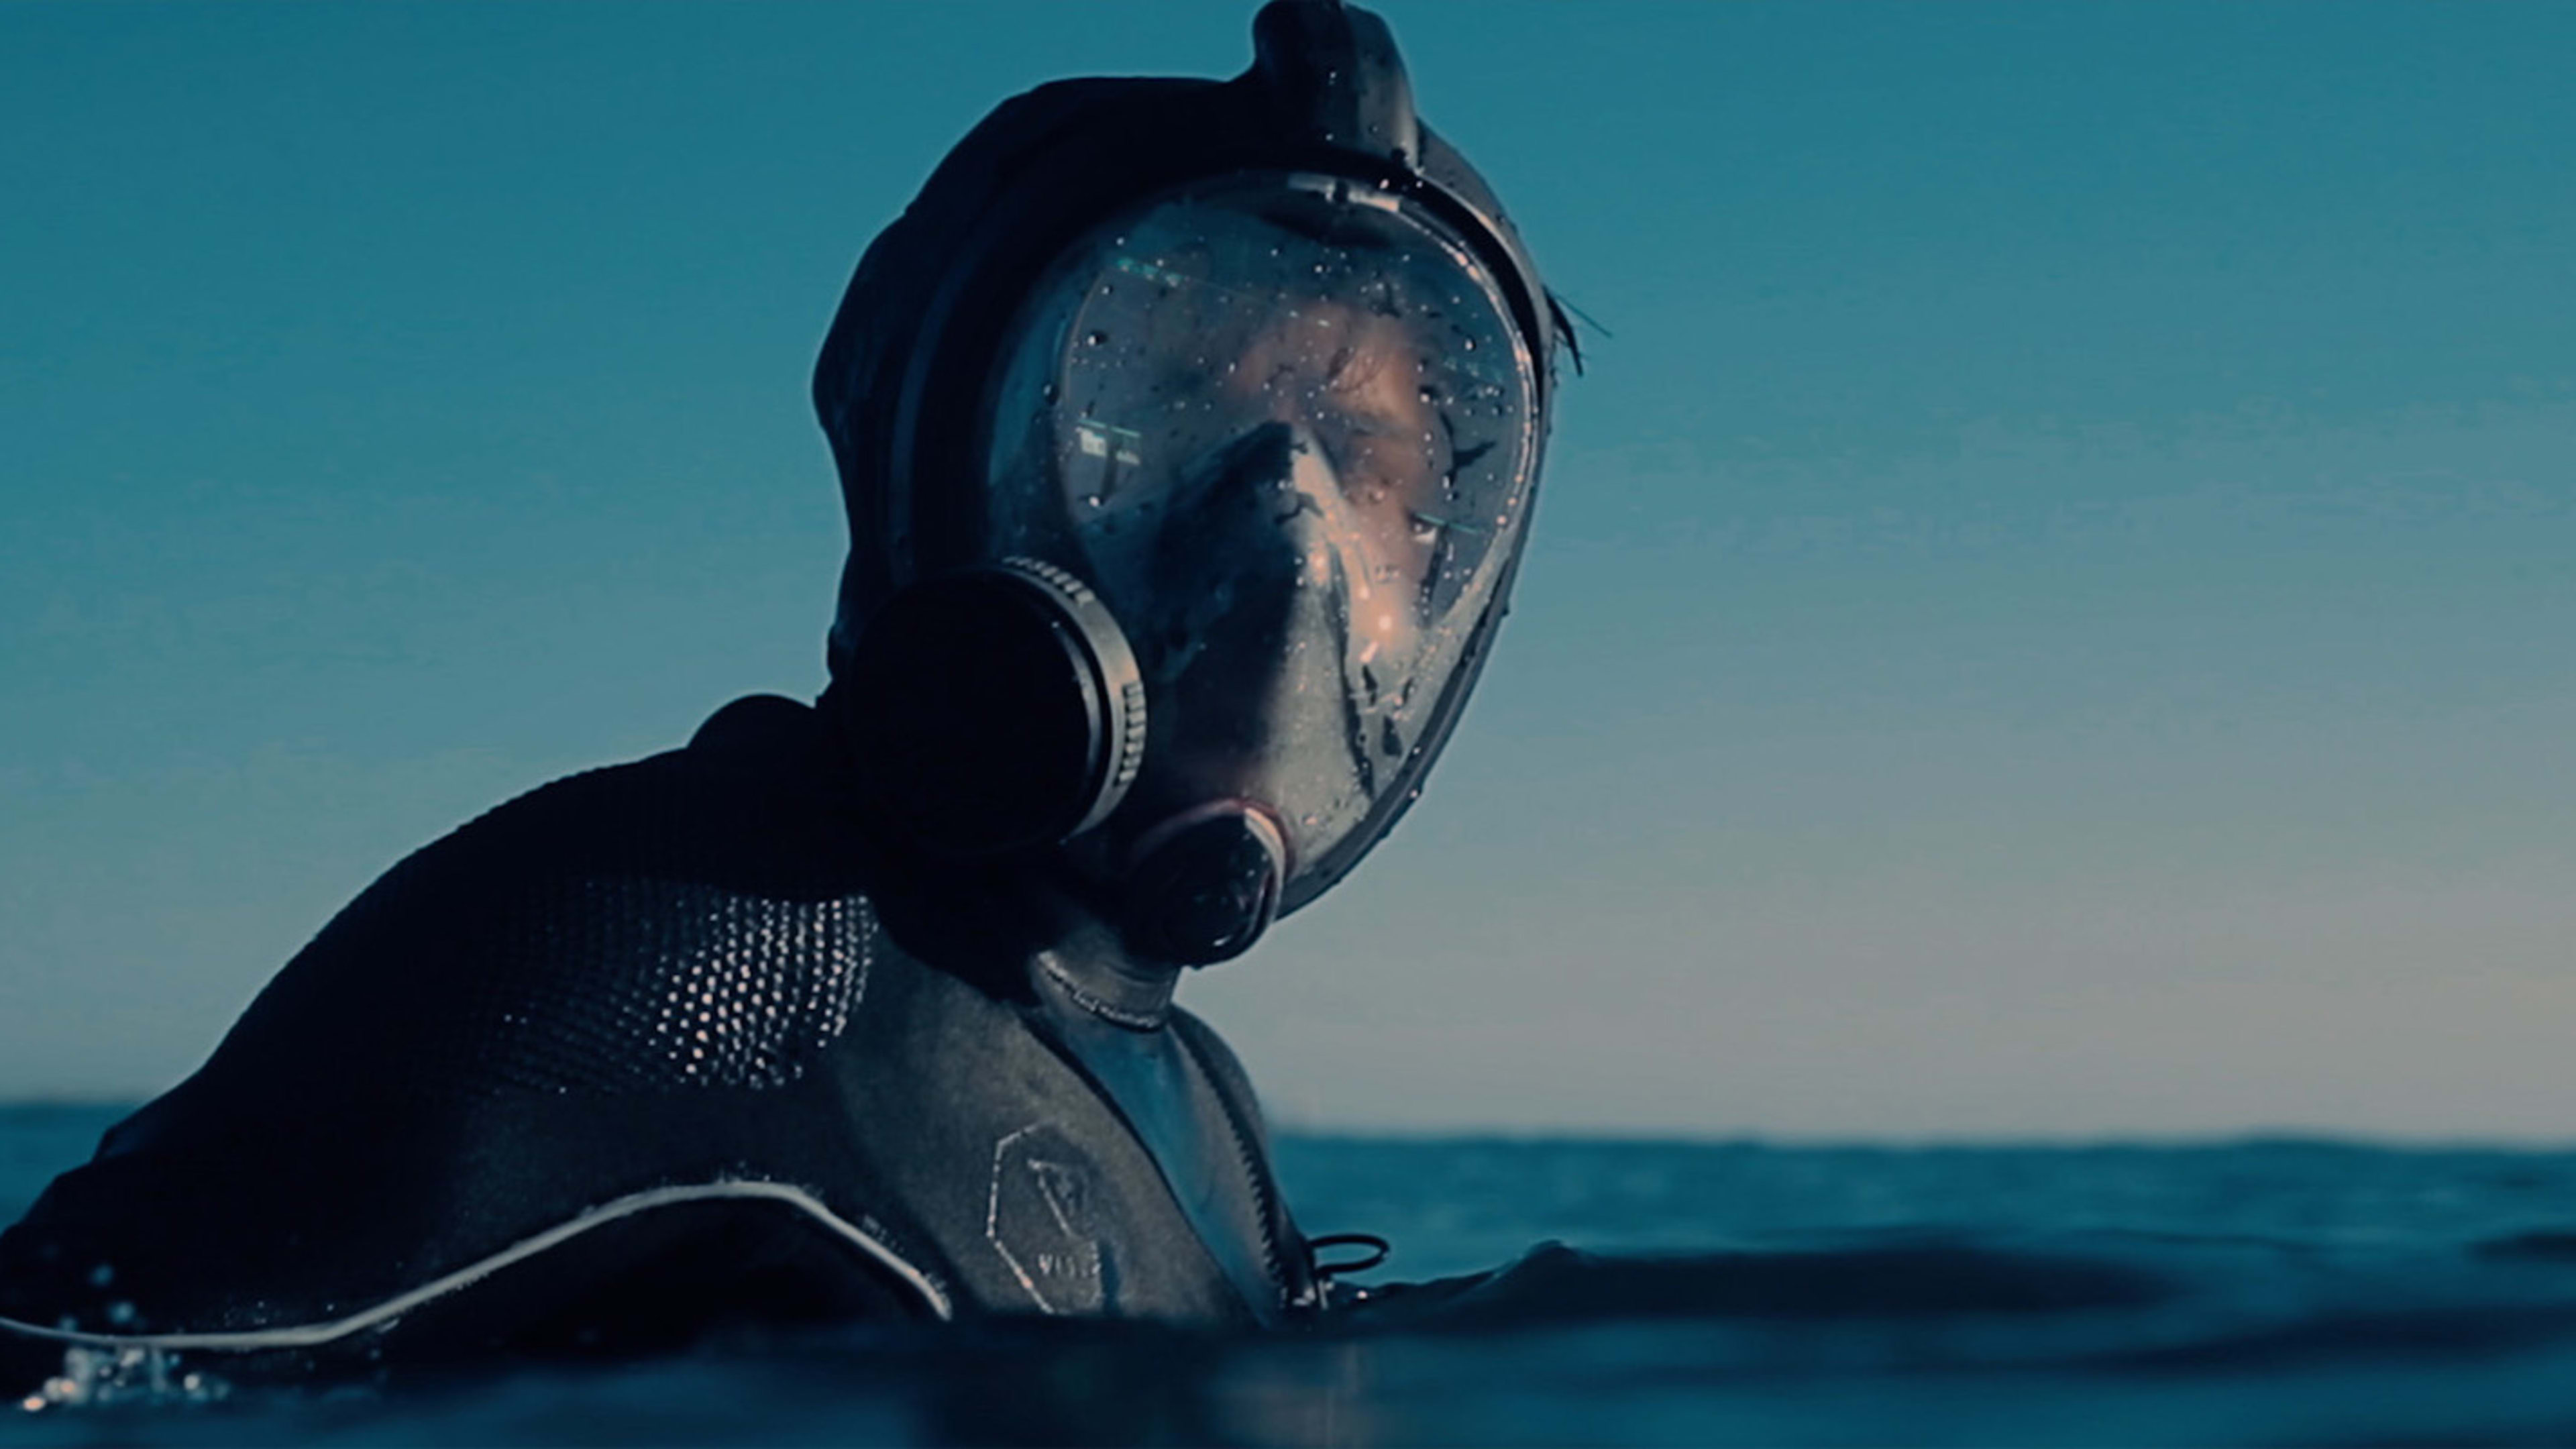 Watch a surfer shred in the postapocalyptic wetsuit of the future